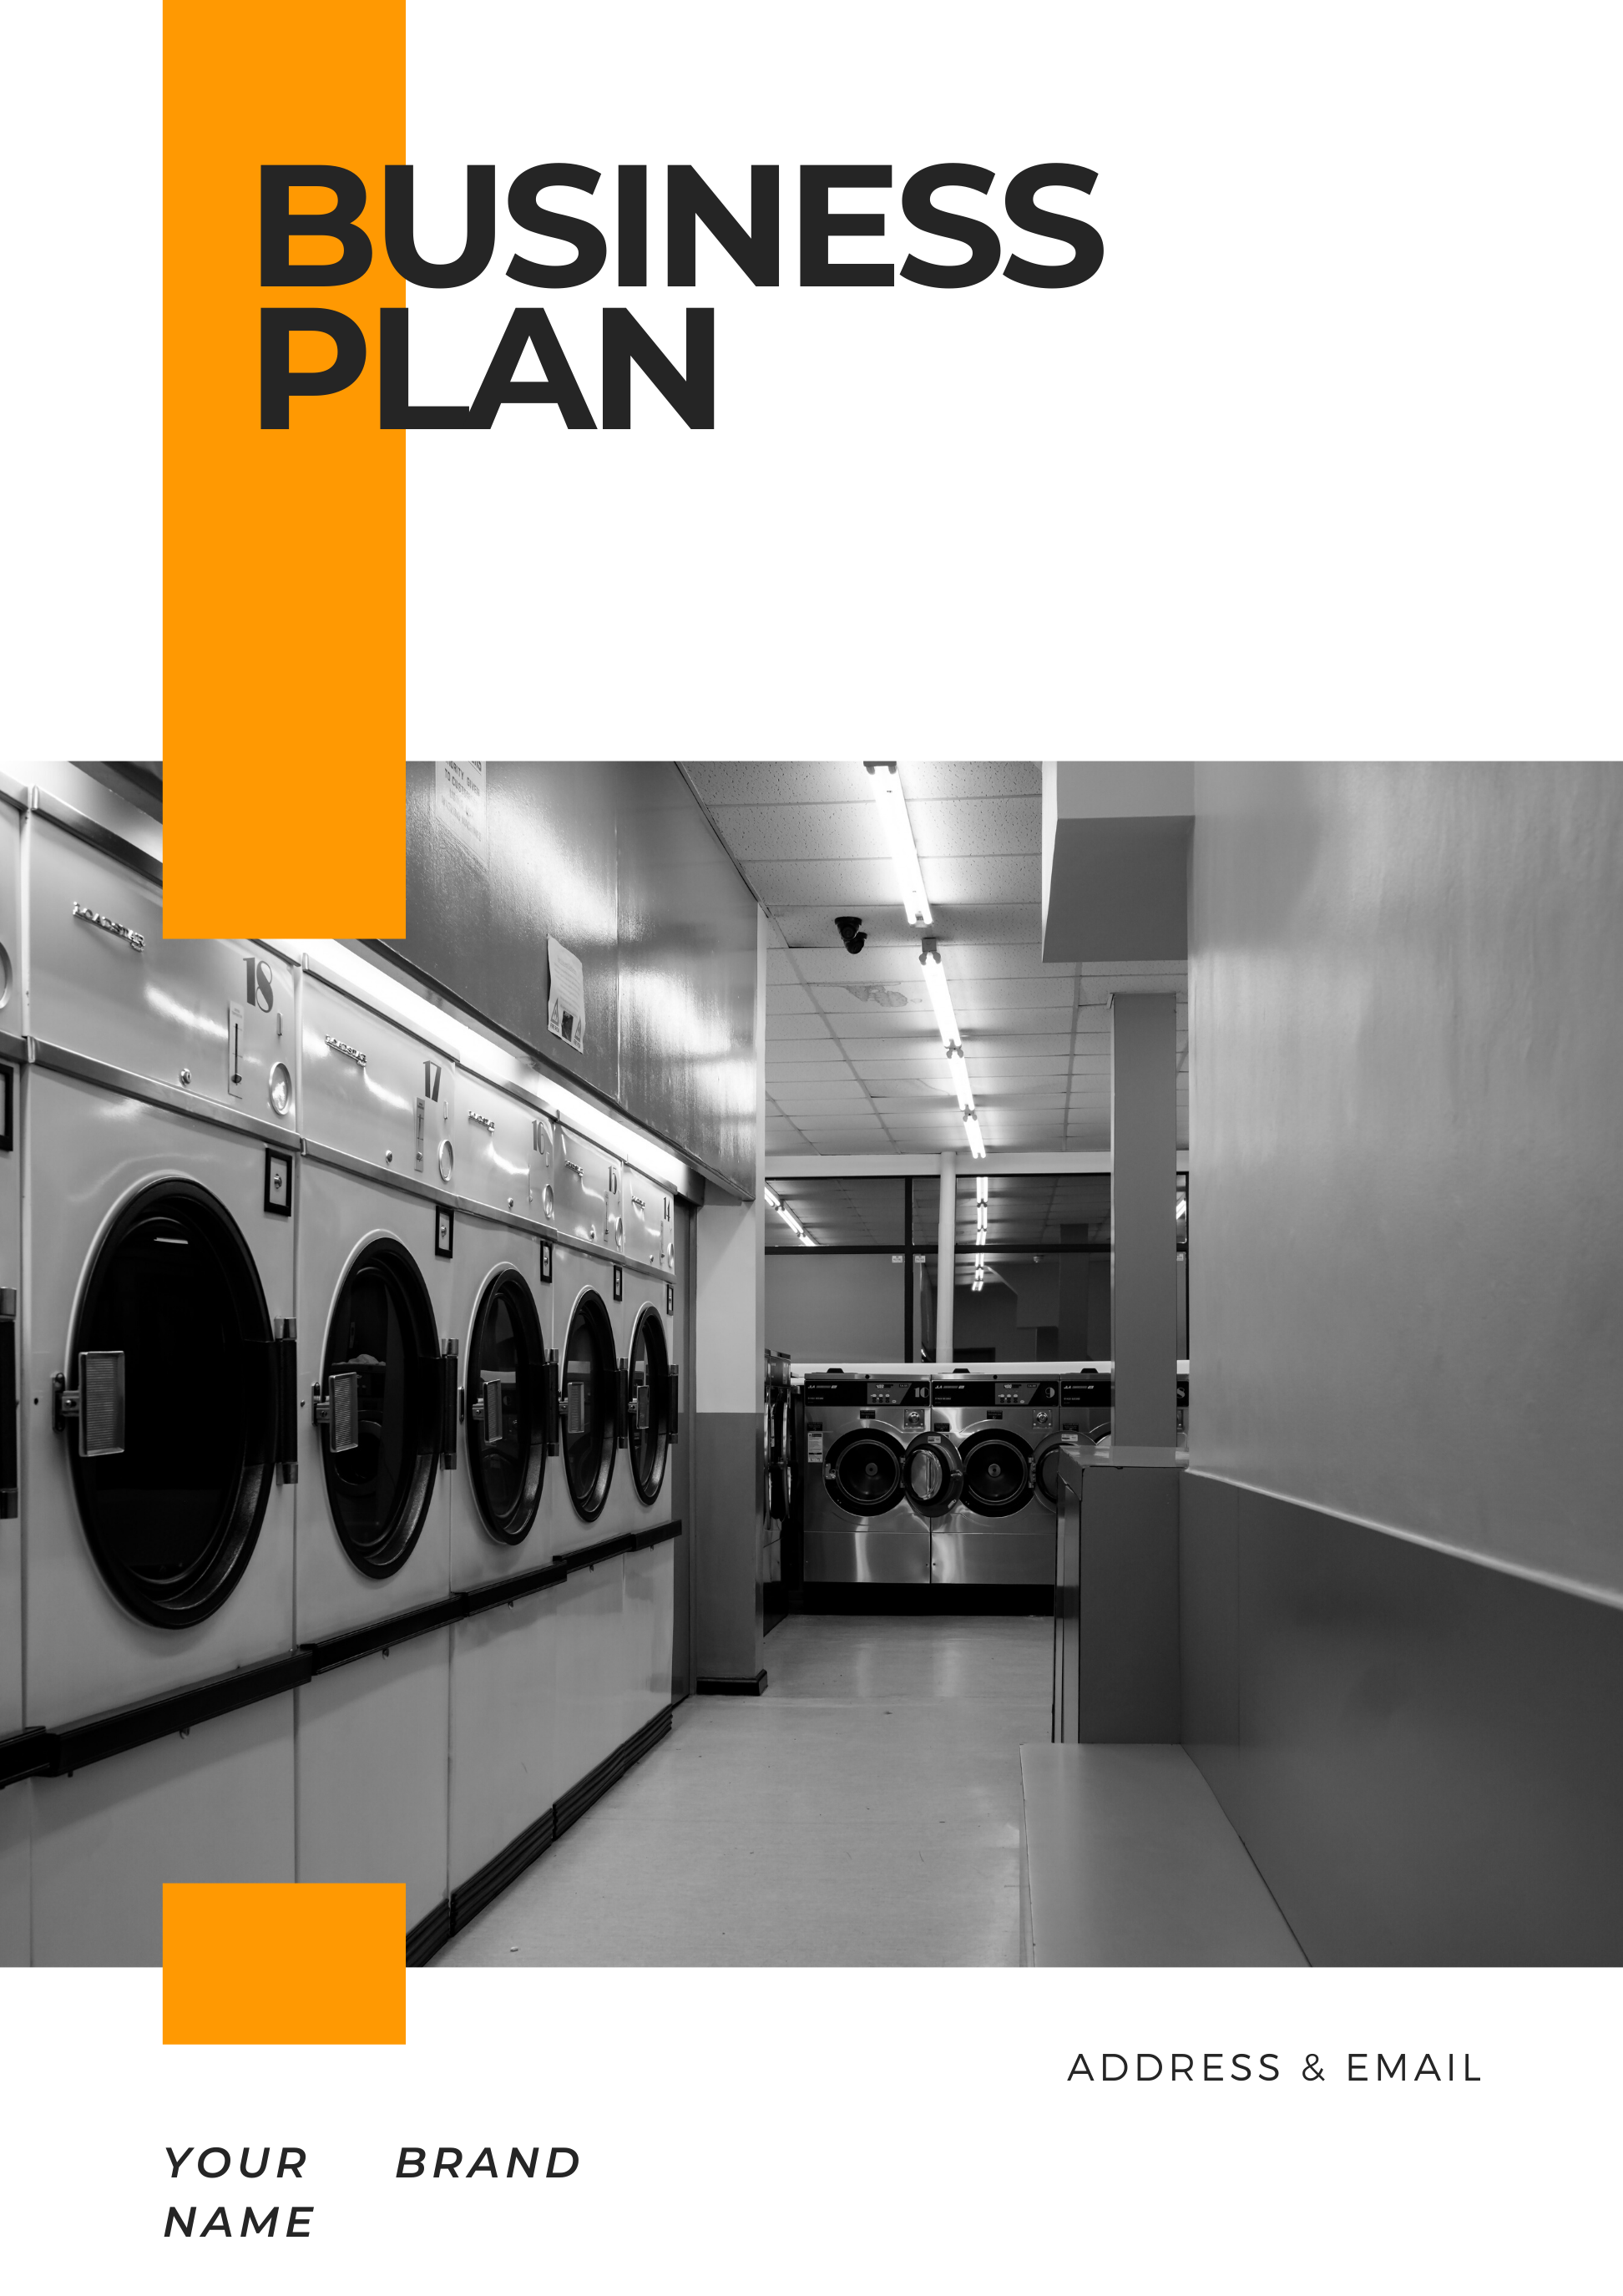 business plan for new laundromat